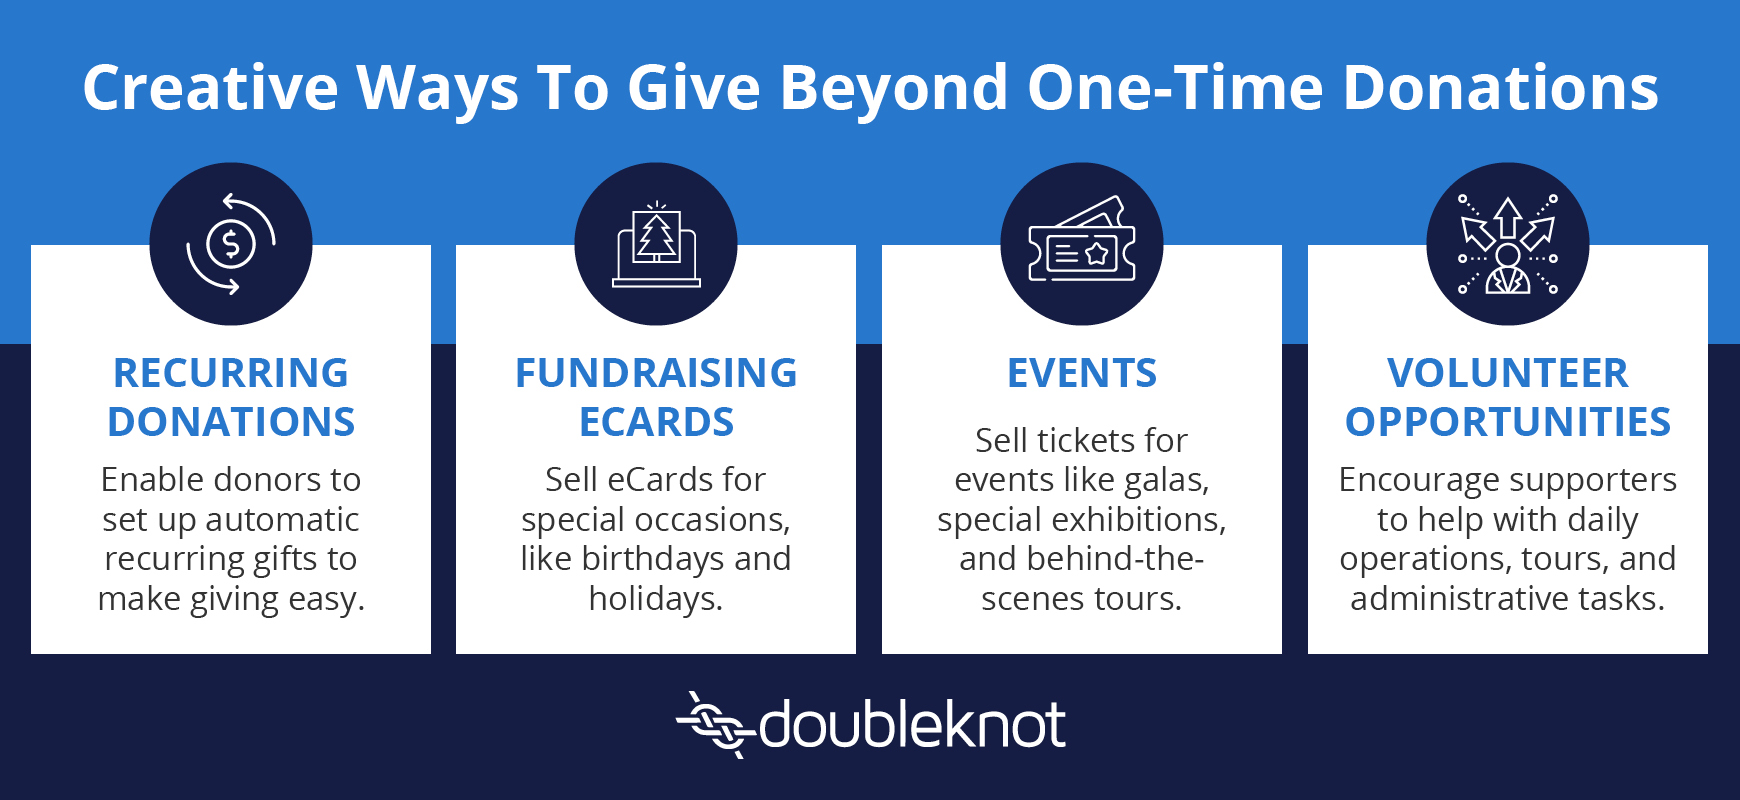 This infographic outlines creative ways to give that will advance donor relationships.